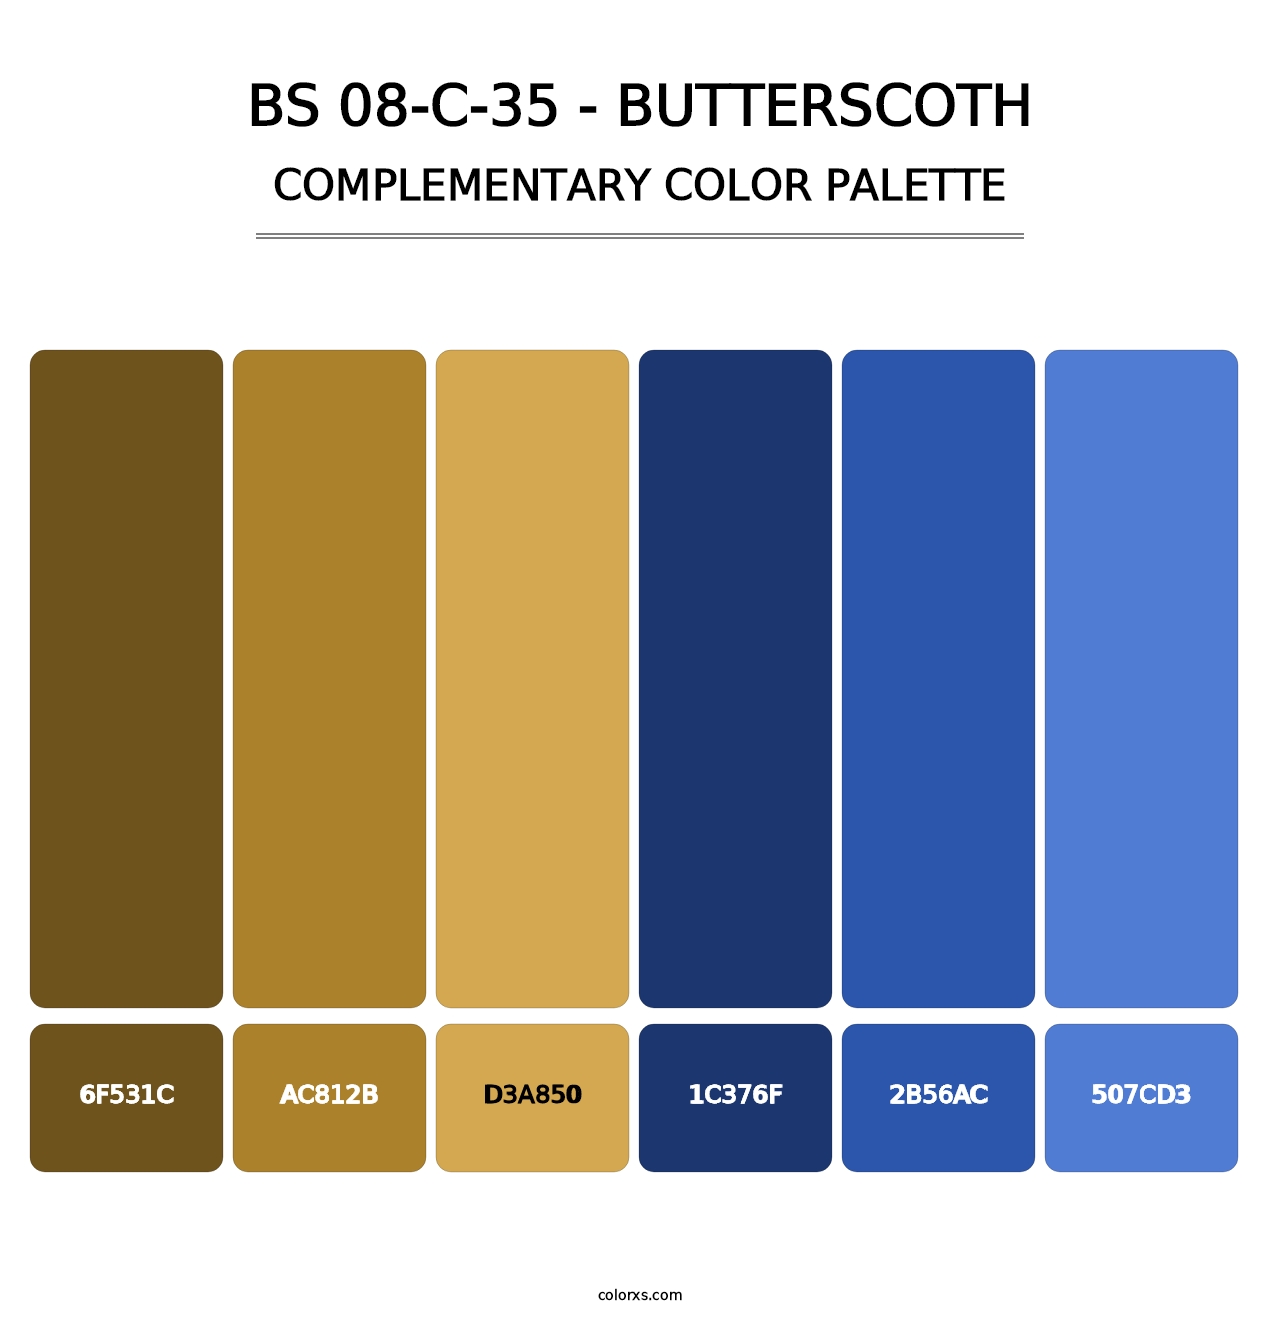 BS 08-C-35 - Butterscoth - Complementary Color Palette